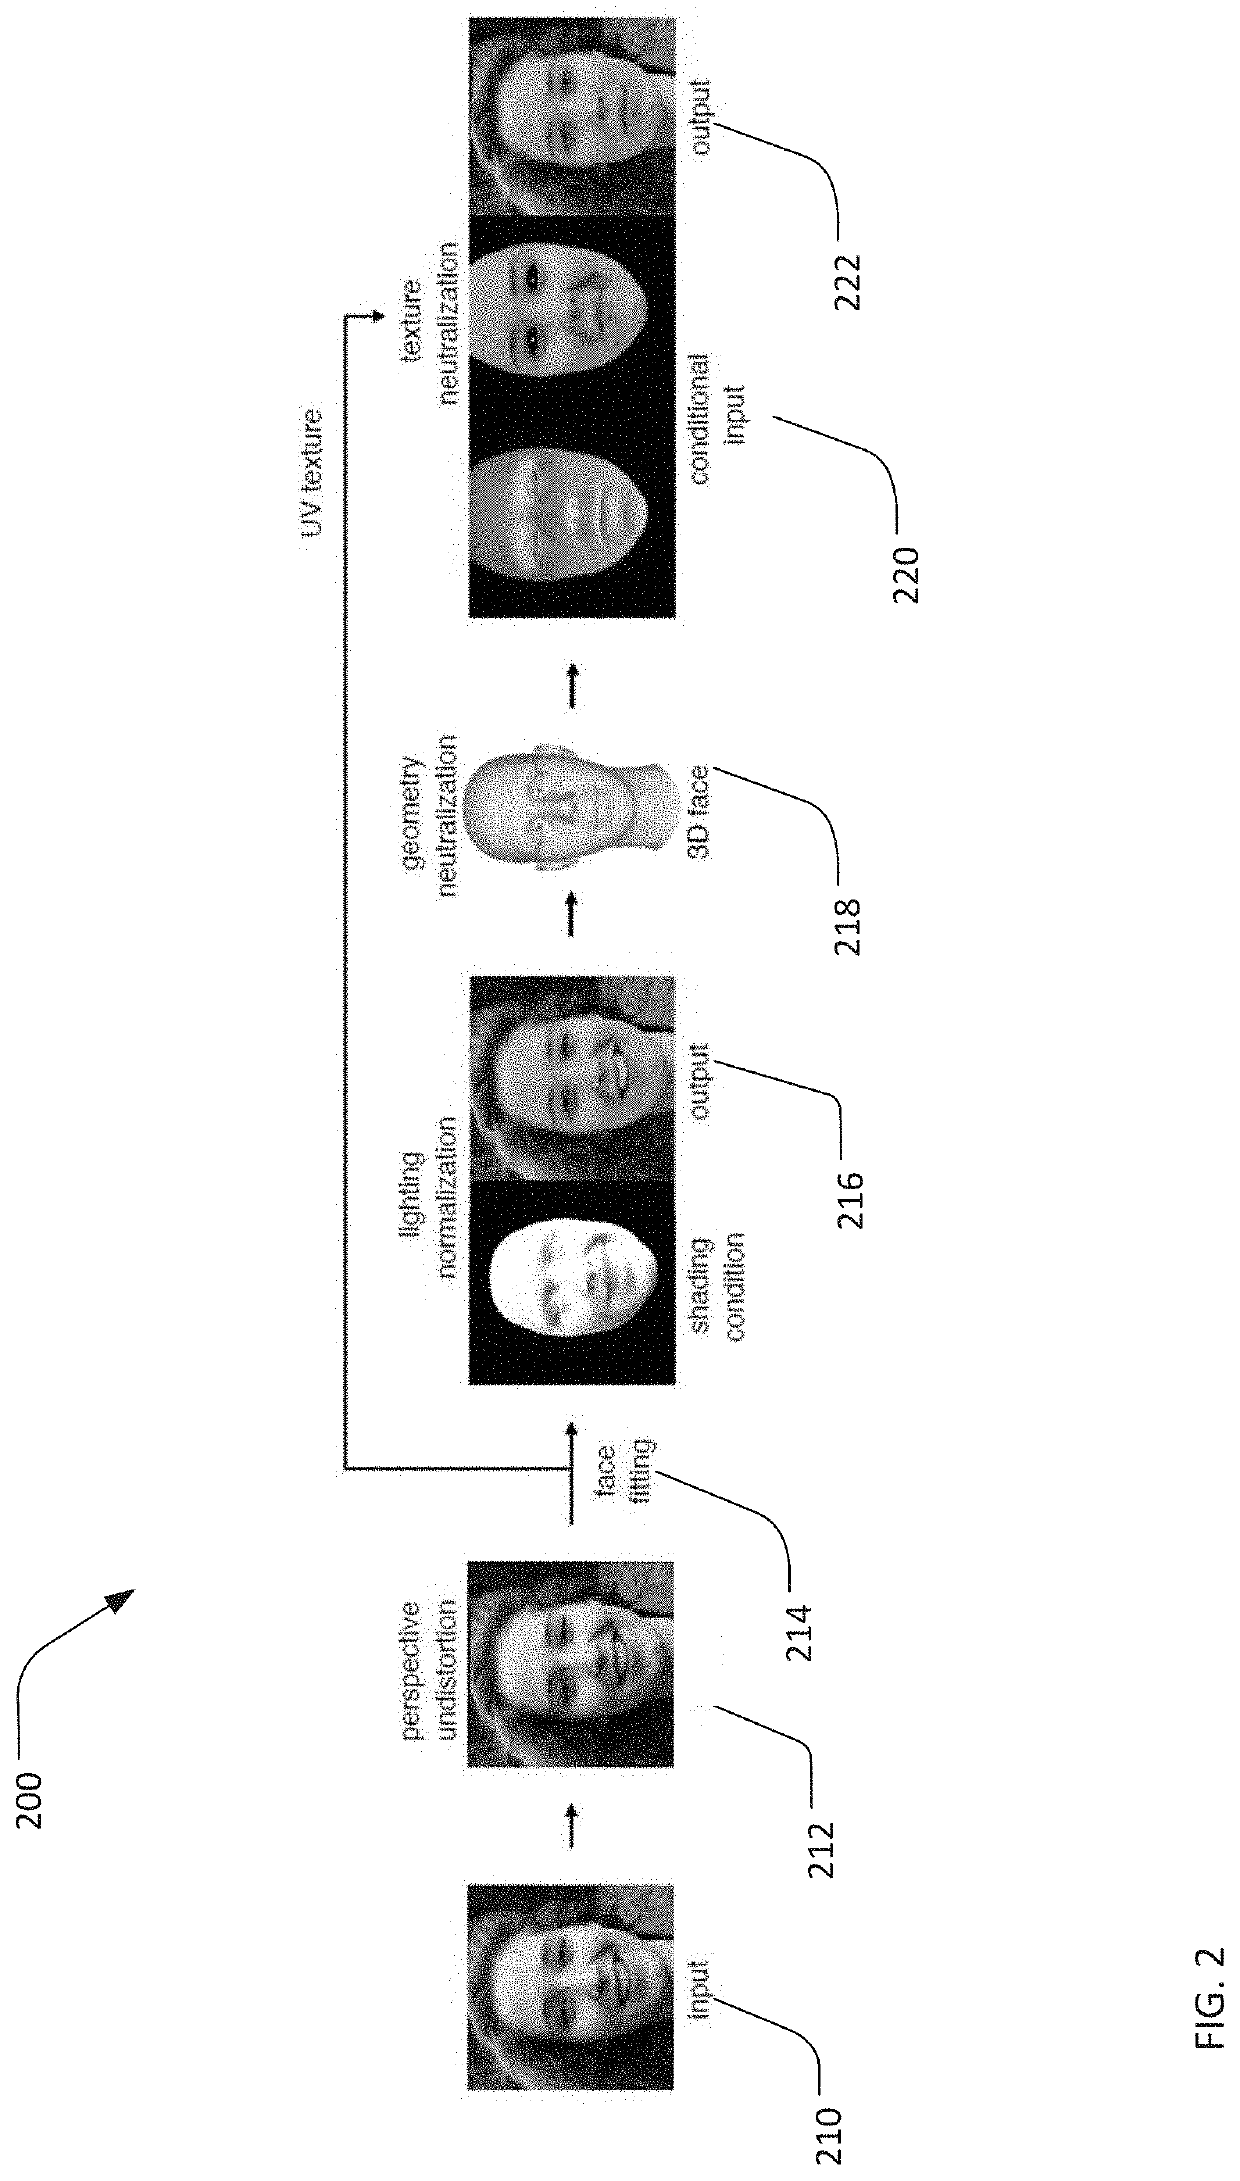 Normalization of facial images using deep neural networks